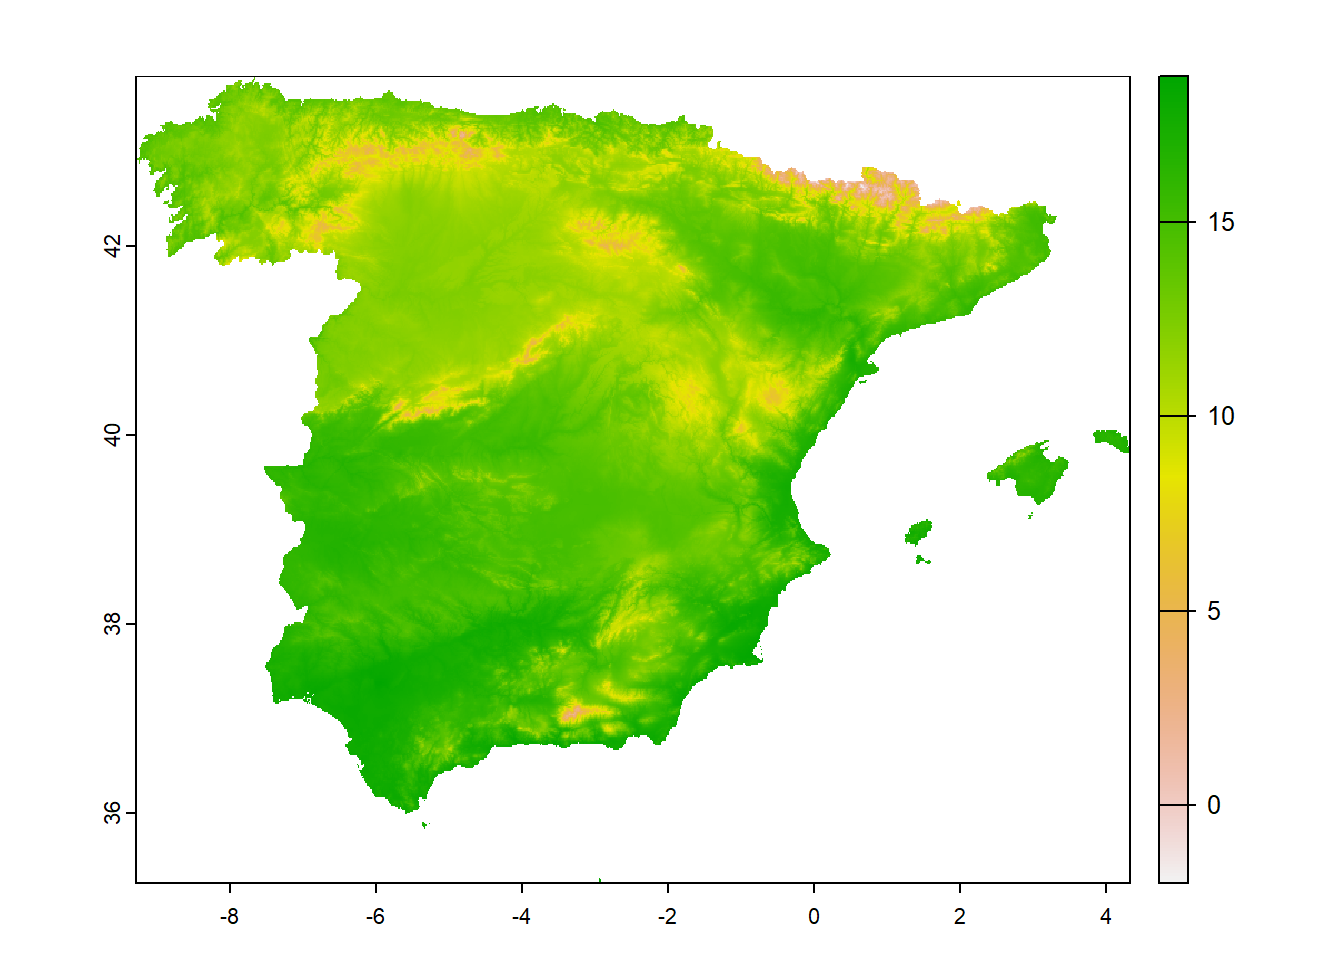 Map of Spain excluding the Canary Islands region (top-left), and cropped raster (top-right), masked raster (bottom-left), and low resolution raster (bottom-right) representing the average annual temperature in the map.